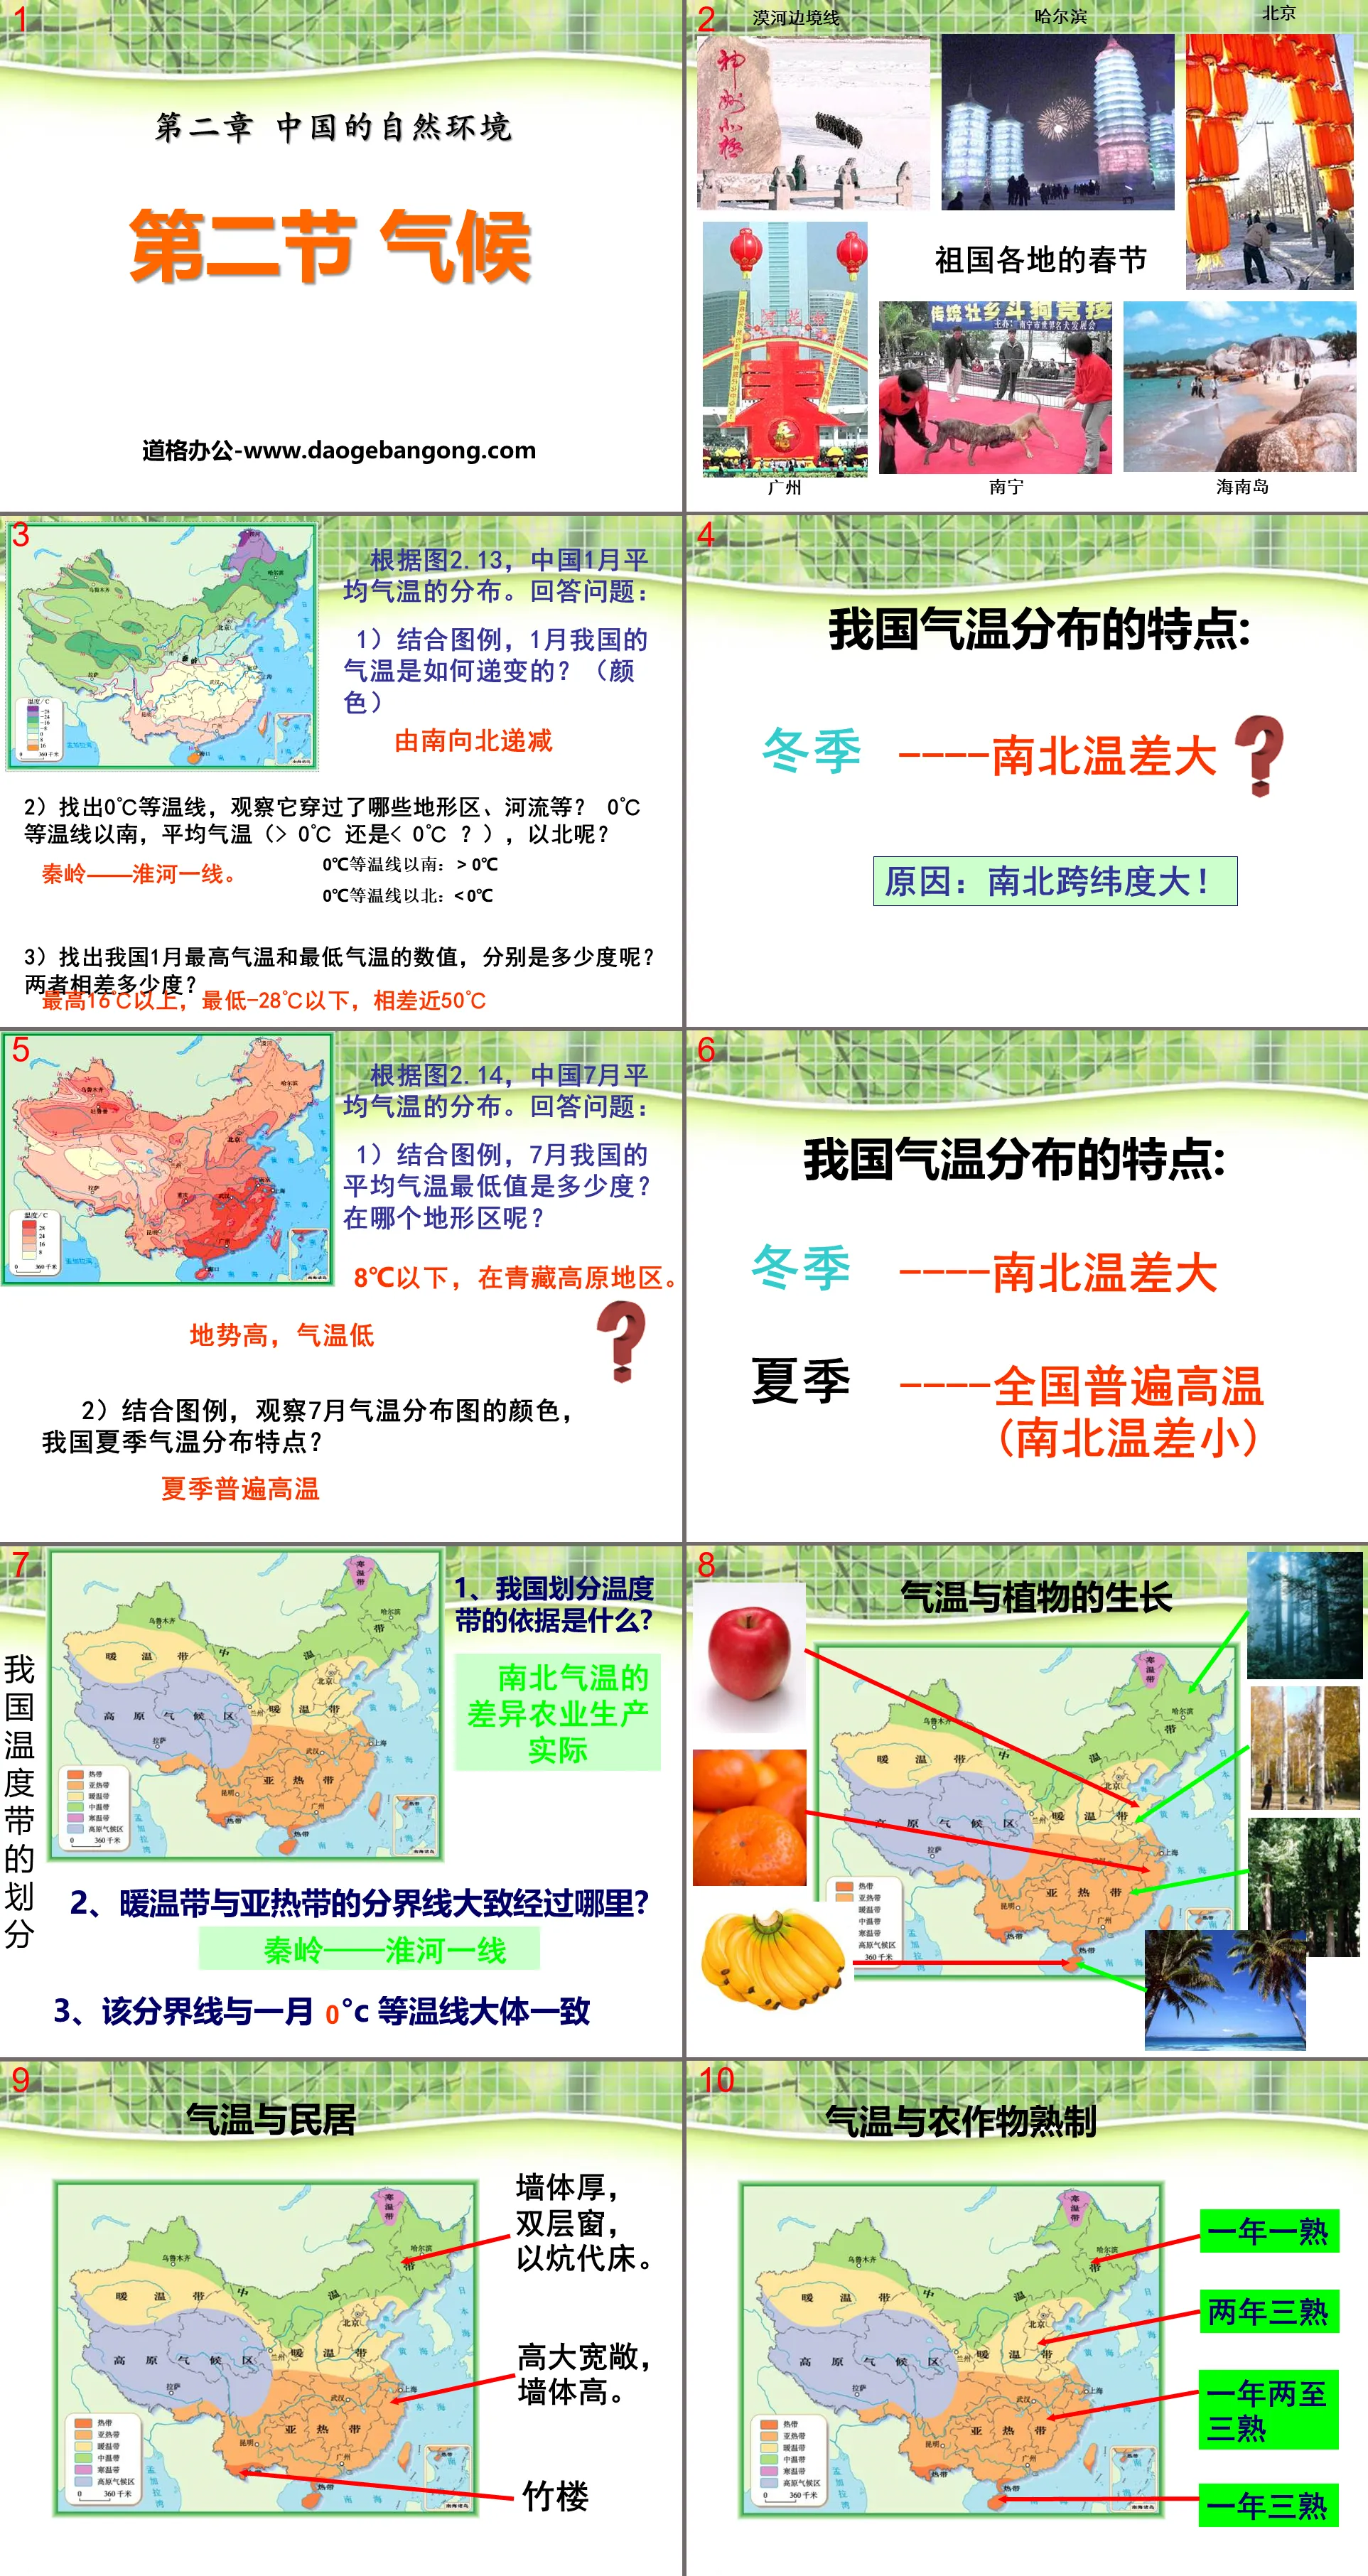 "Climate" China's natural environment PPT courseware 5